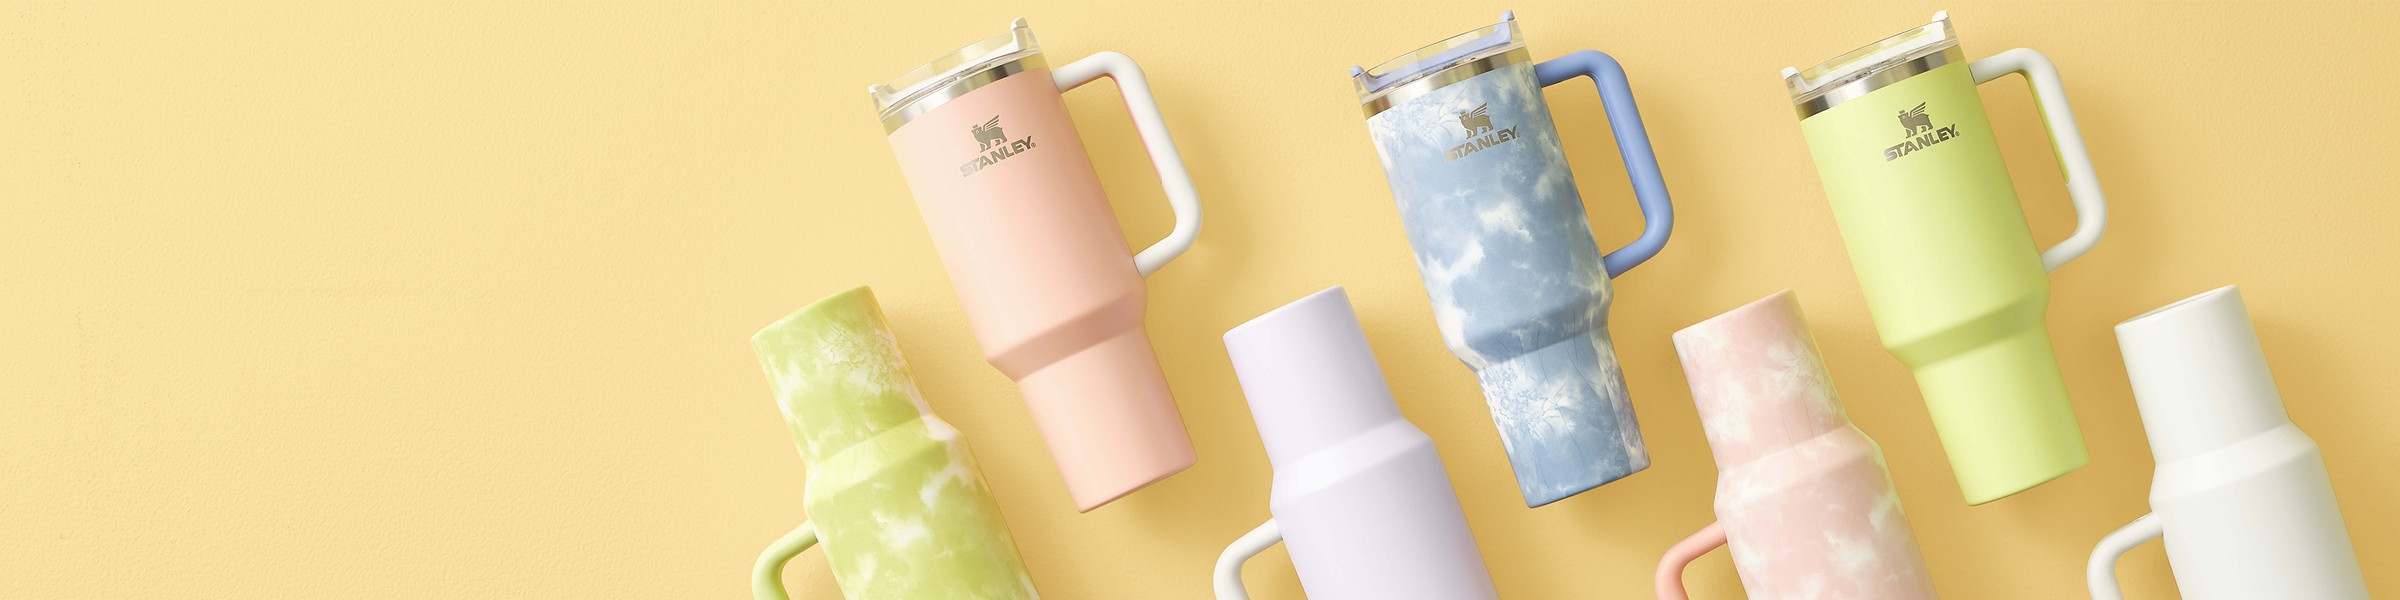 Stay hydrated all day with new Stanley tumblers in colors only available at Target.